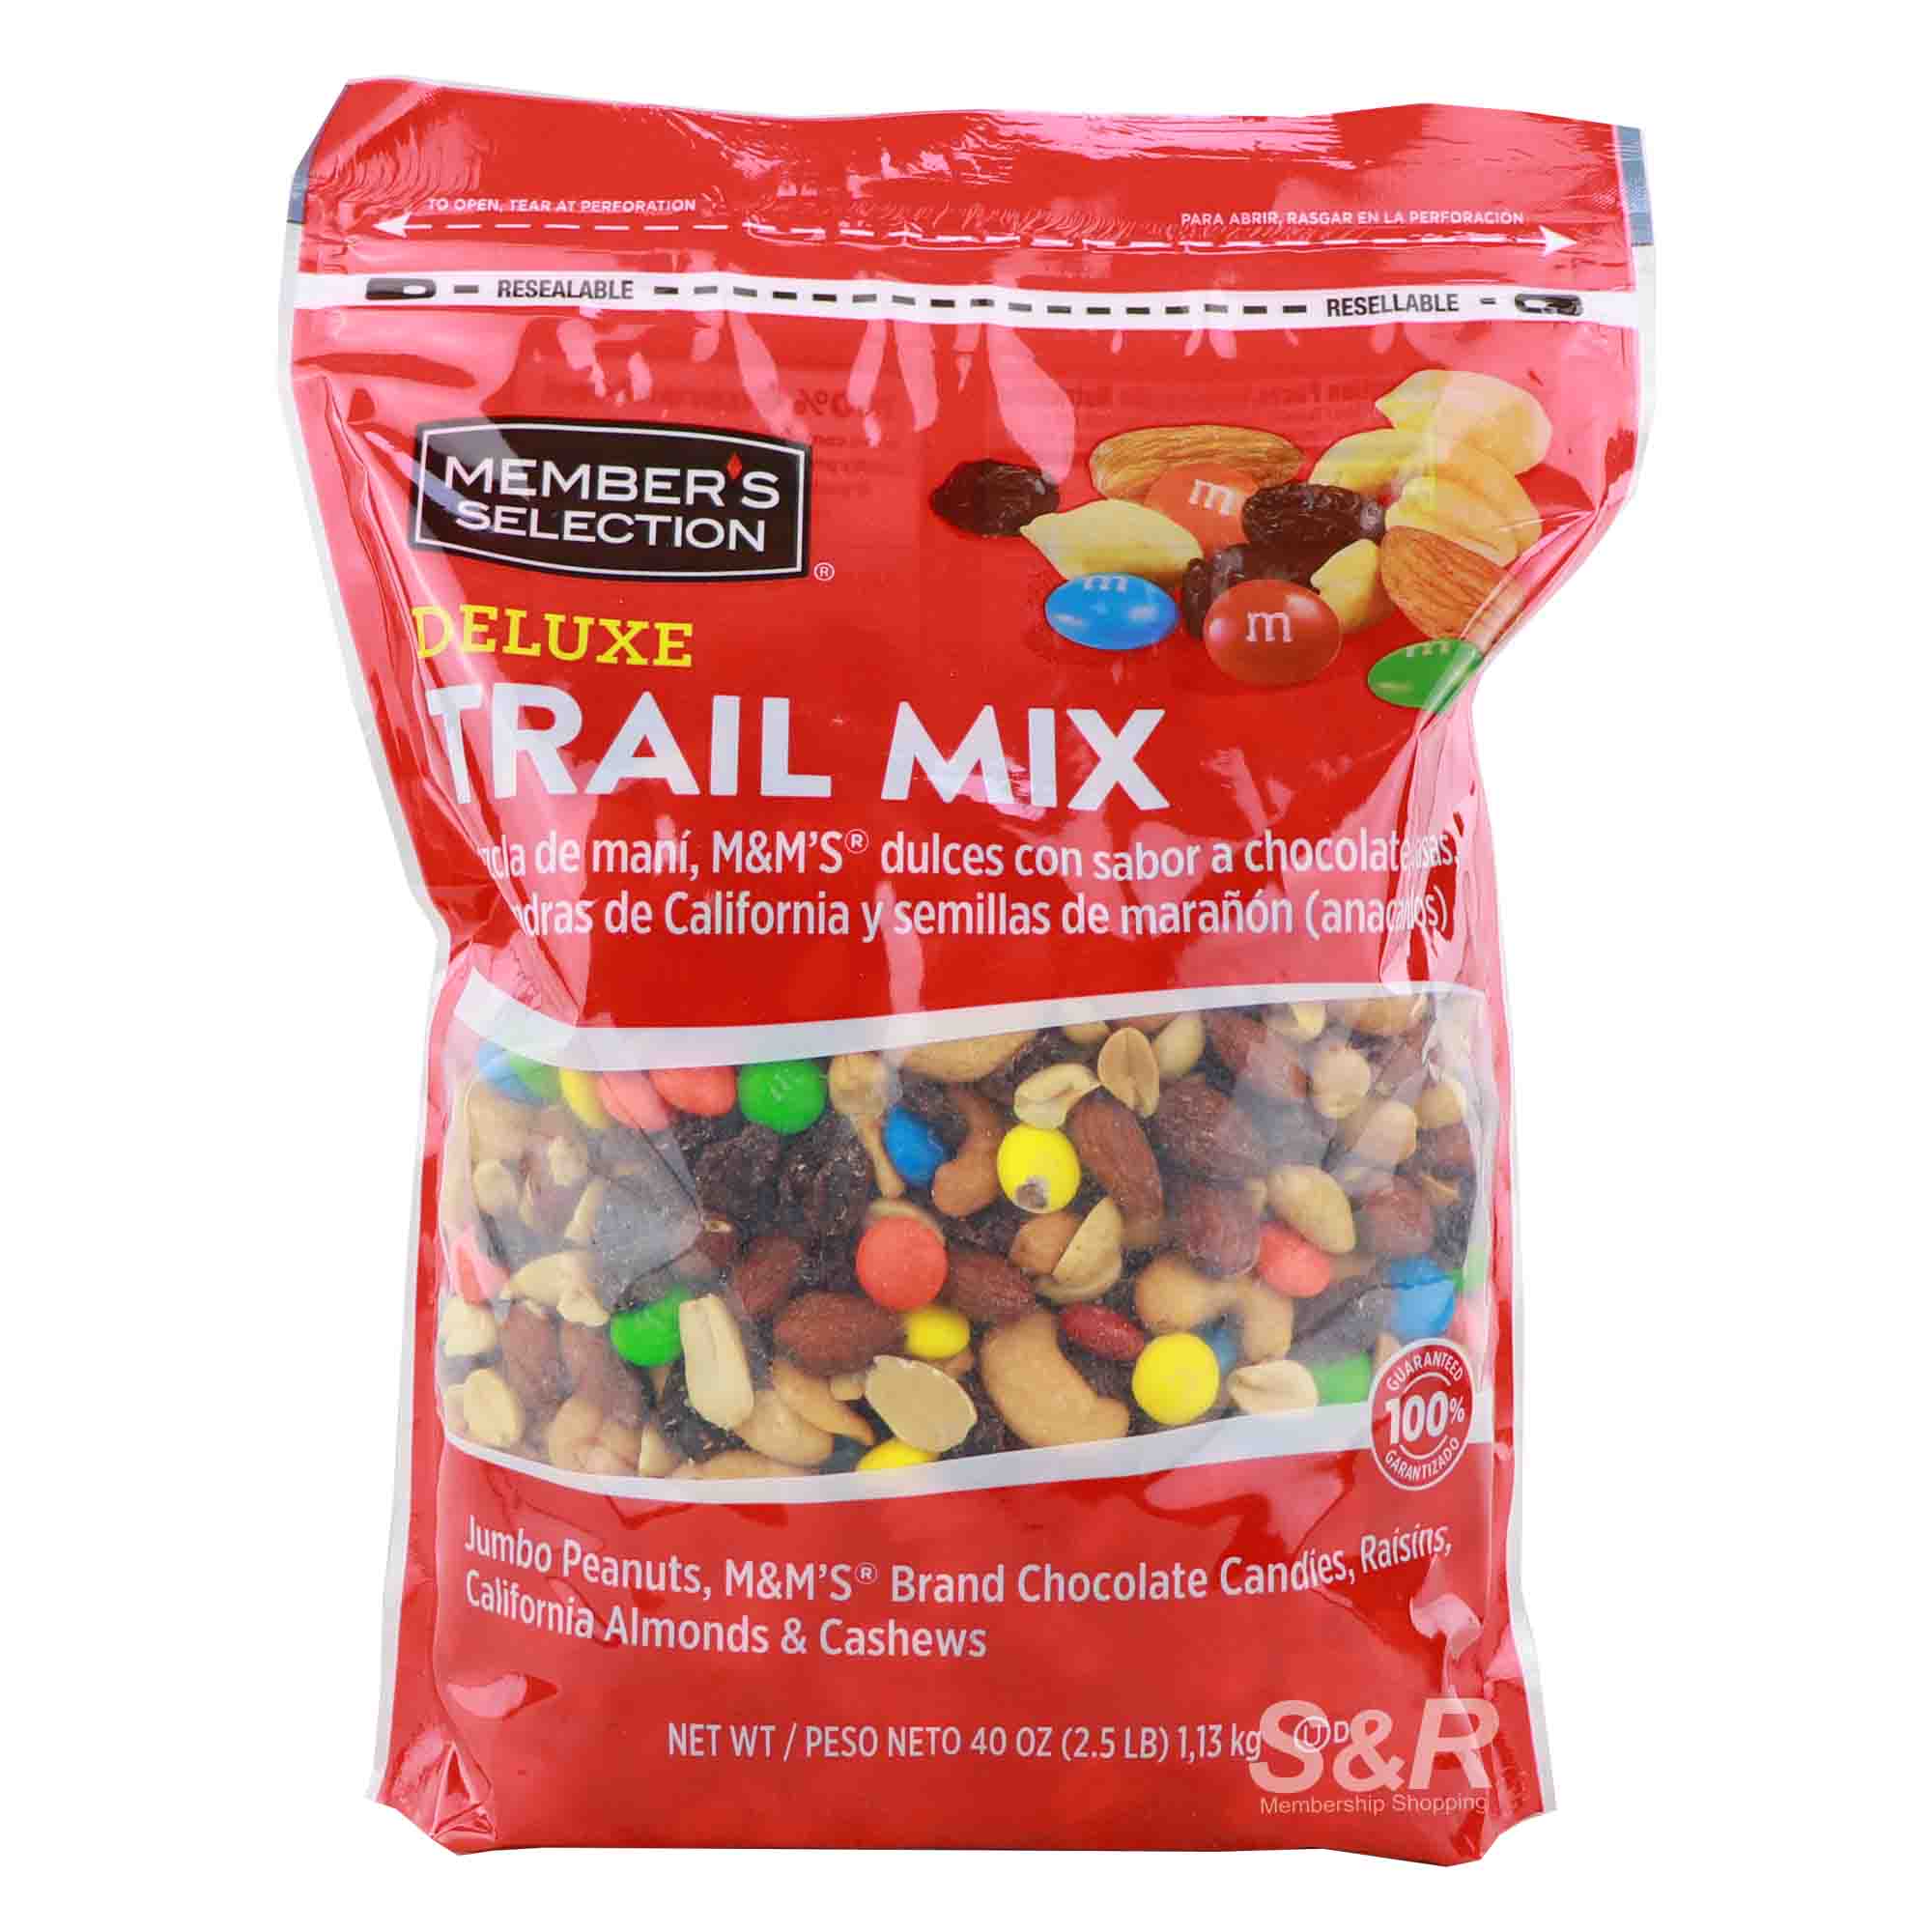 Member's Selection Deluxe Trail Mix 1.13g